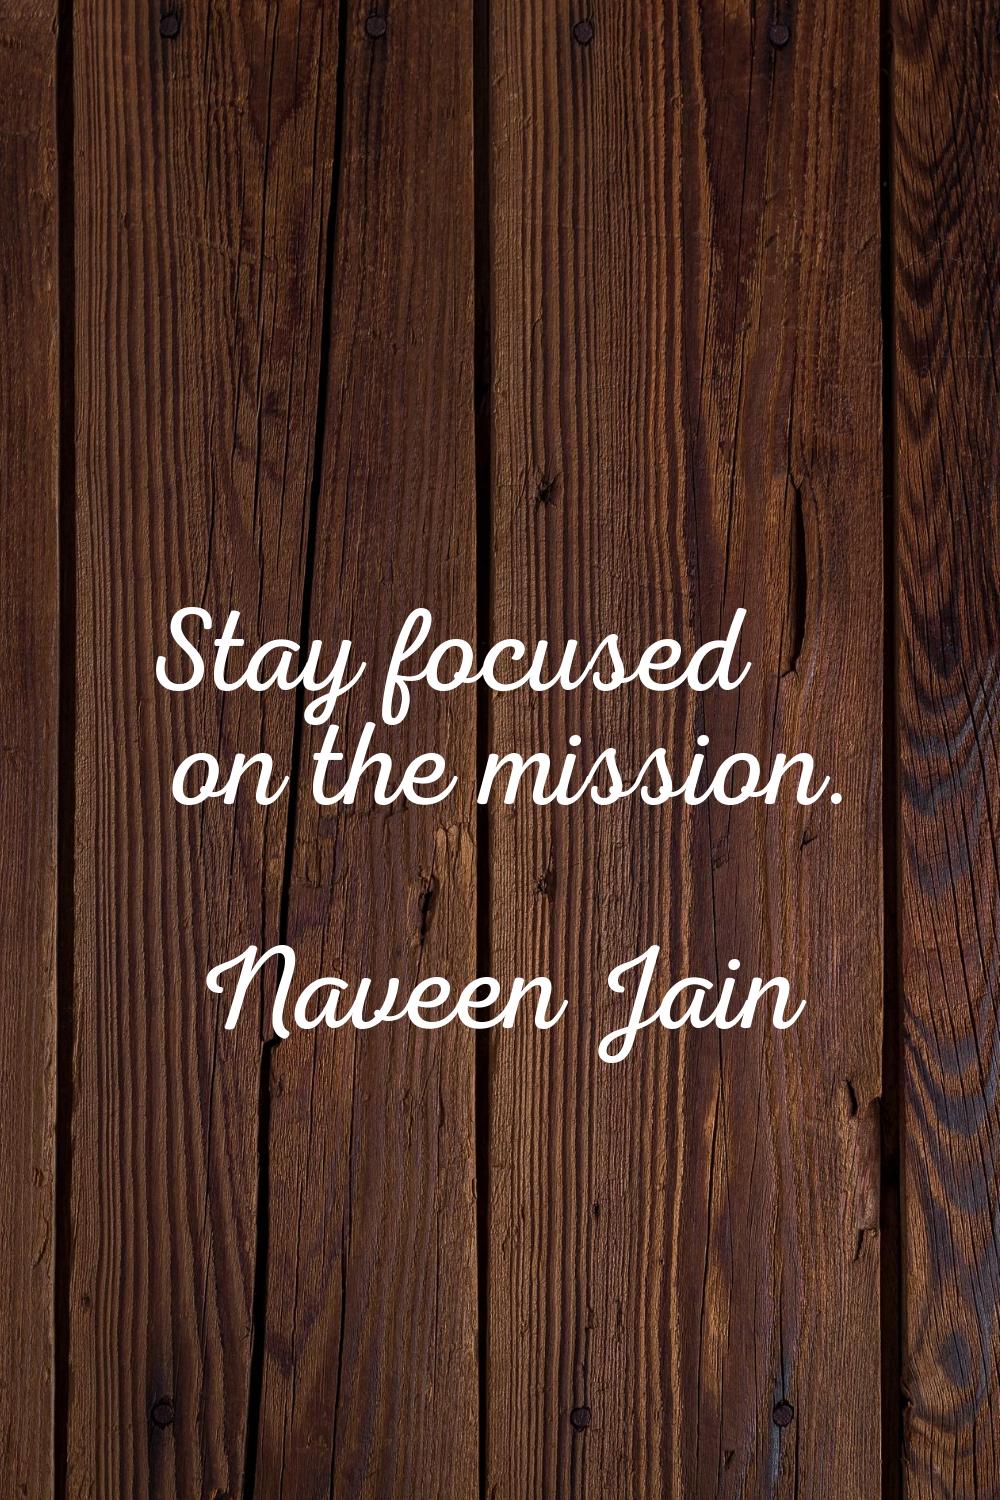 Stay focused on the mission.